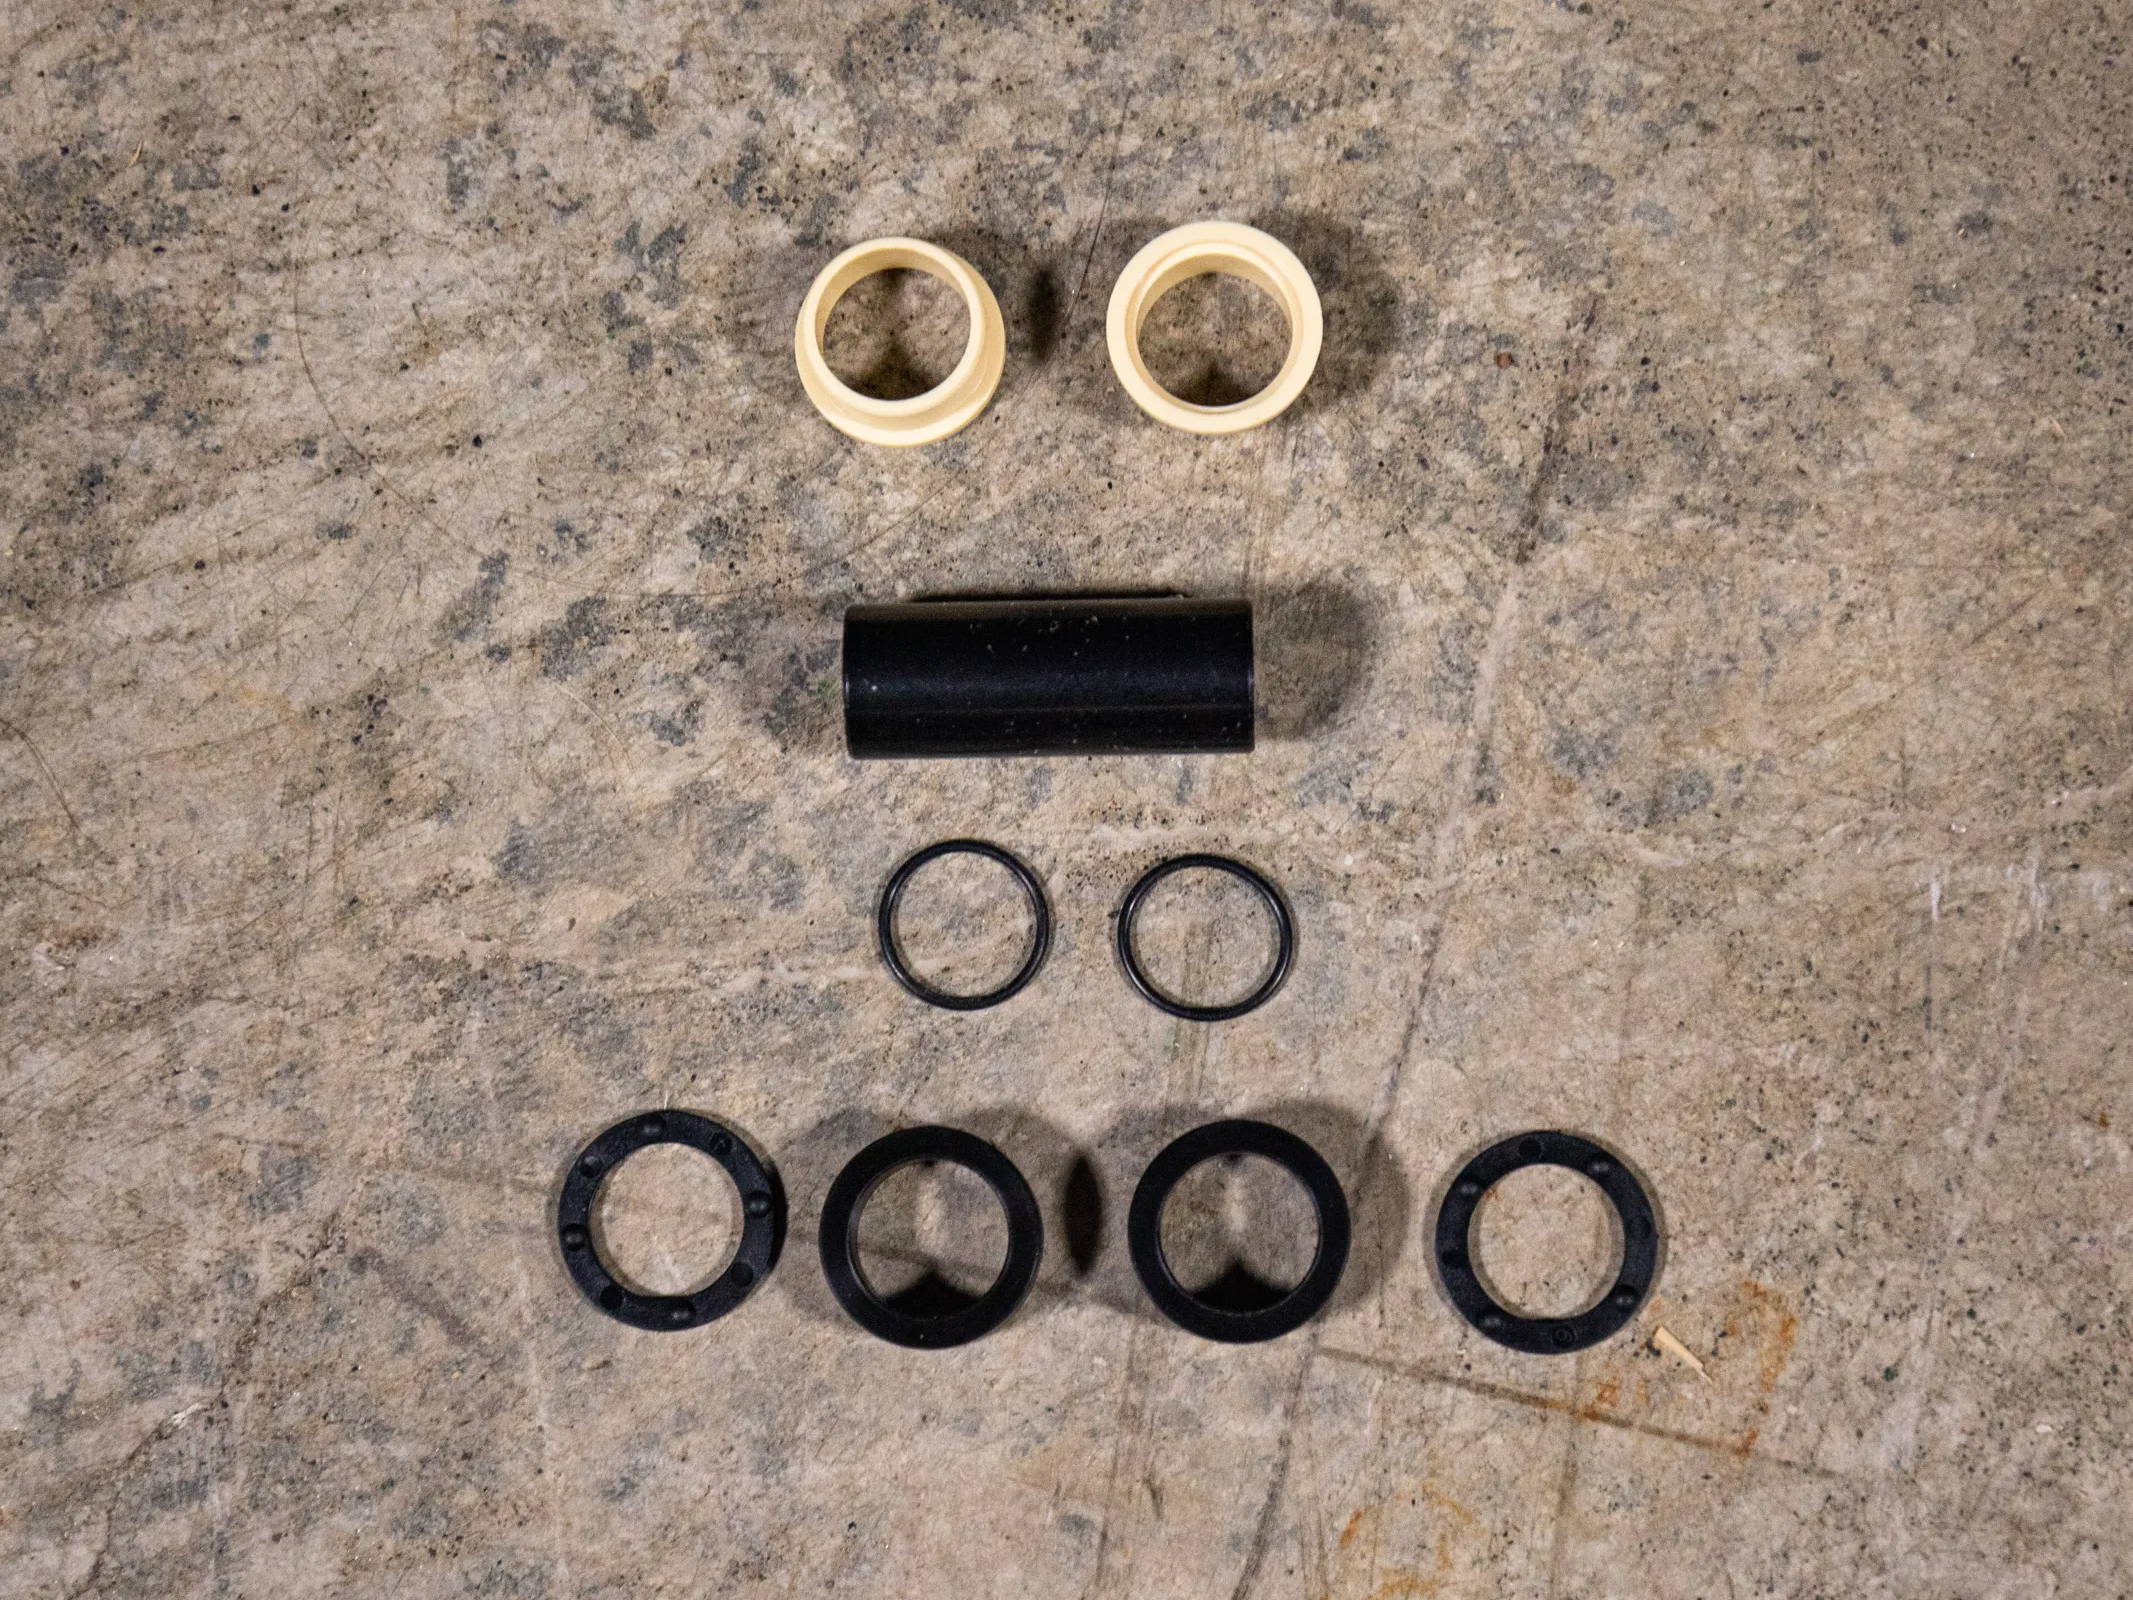 Fox Shox Mountain Bike Rear Shock Mounting hardware components layed out on the floor